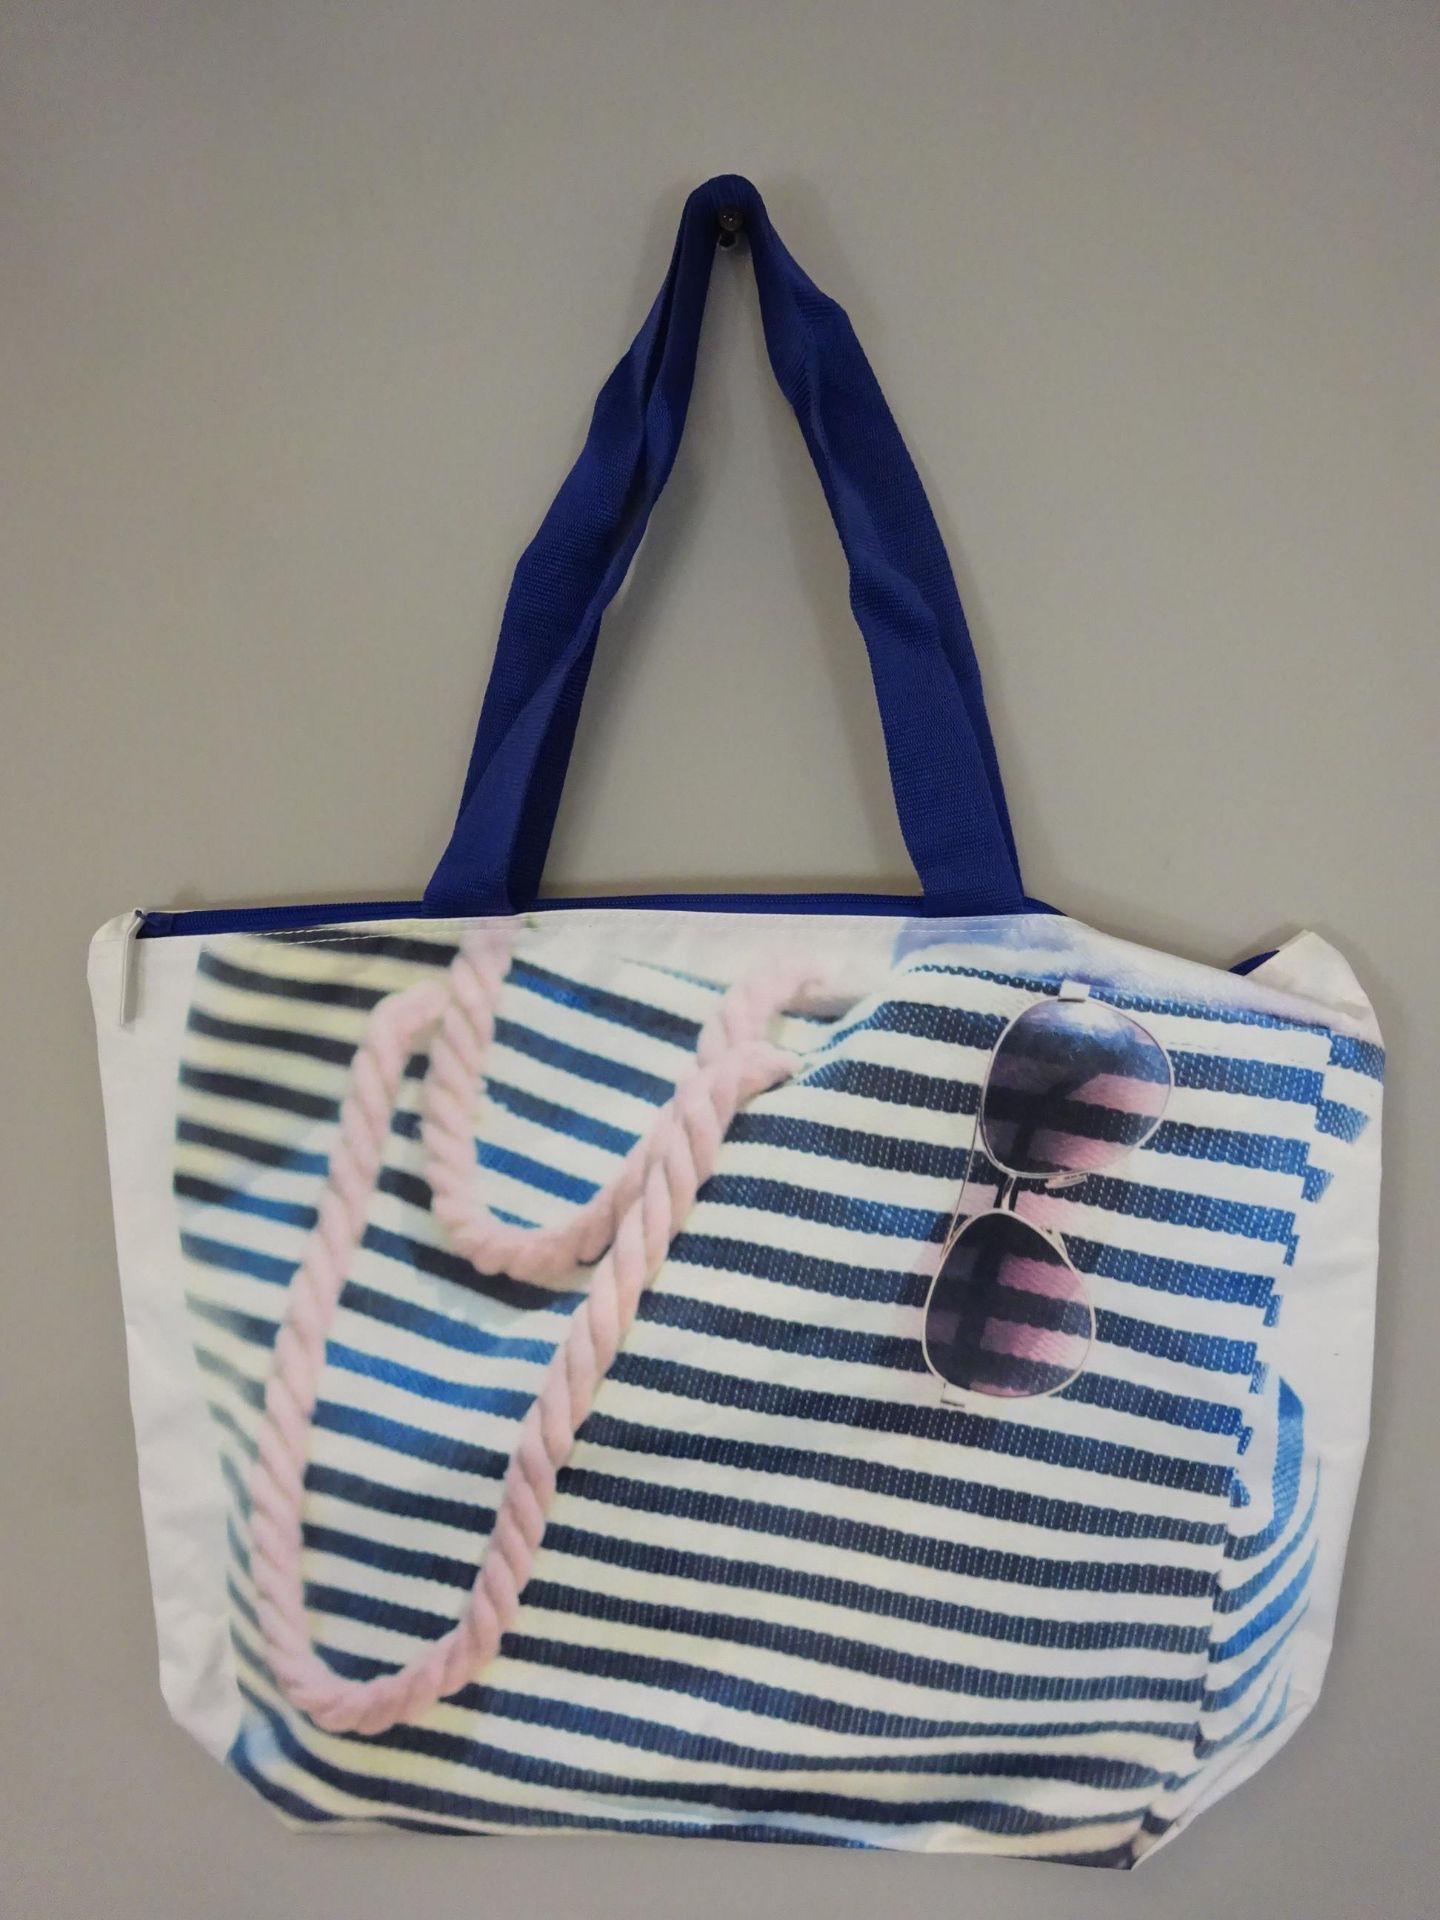 New Stiped Bag Patterened Beach Bag